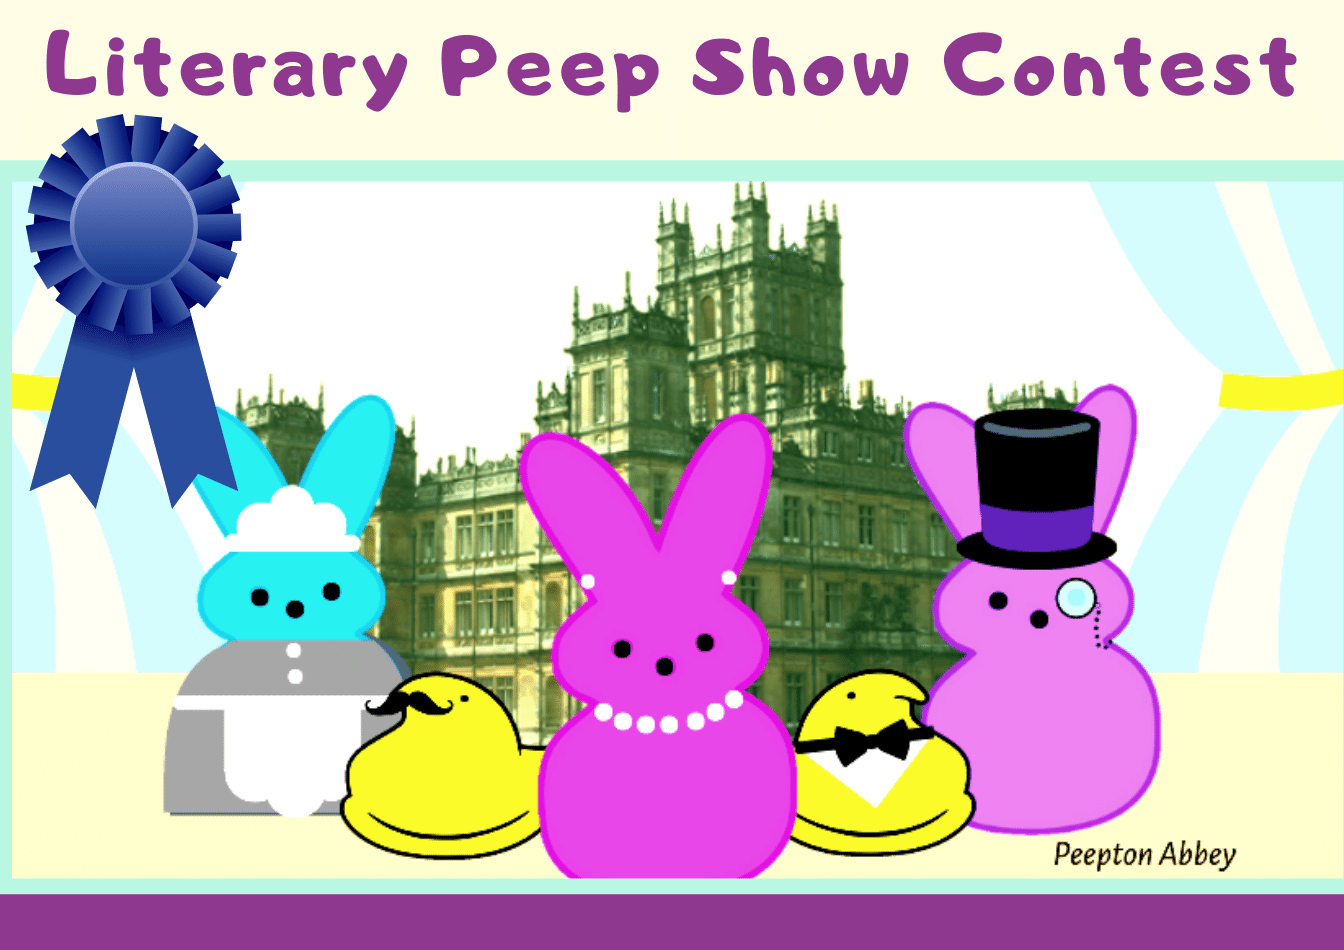 Easter "peeps" standing in front of a manor house. 